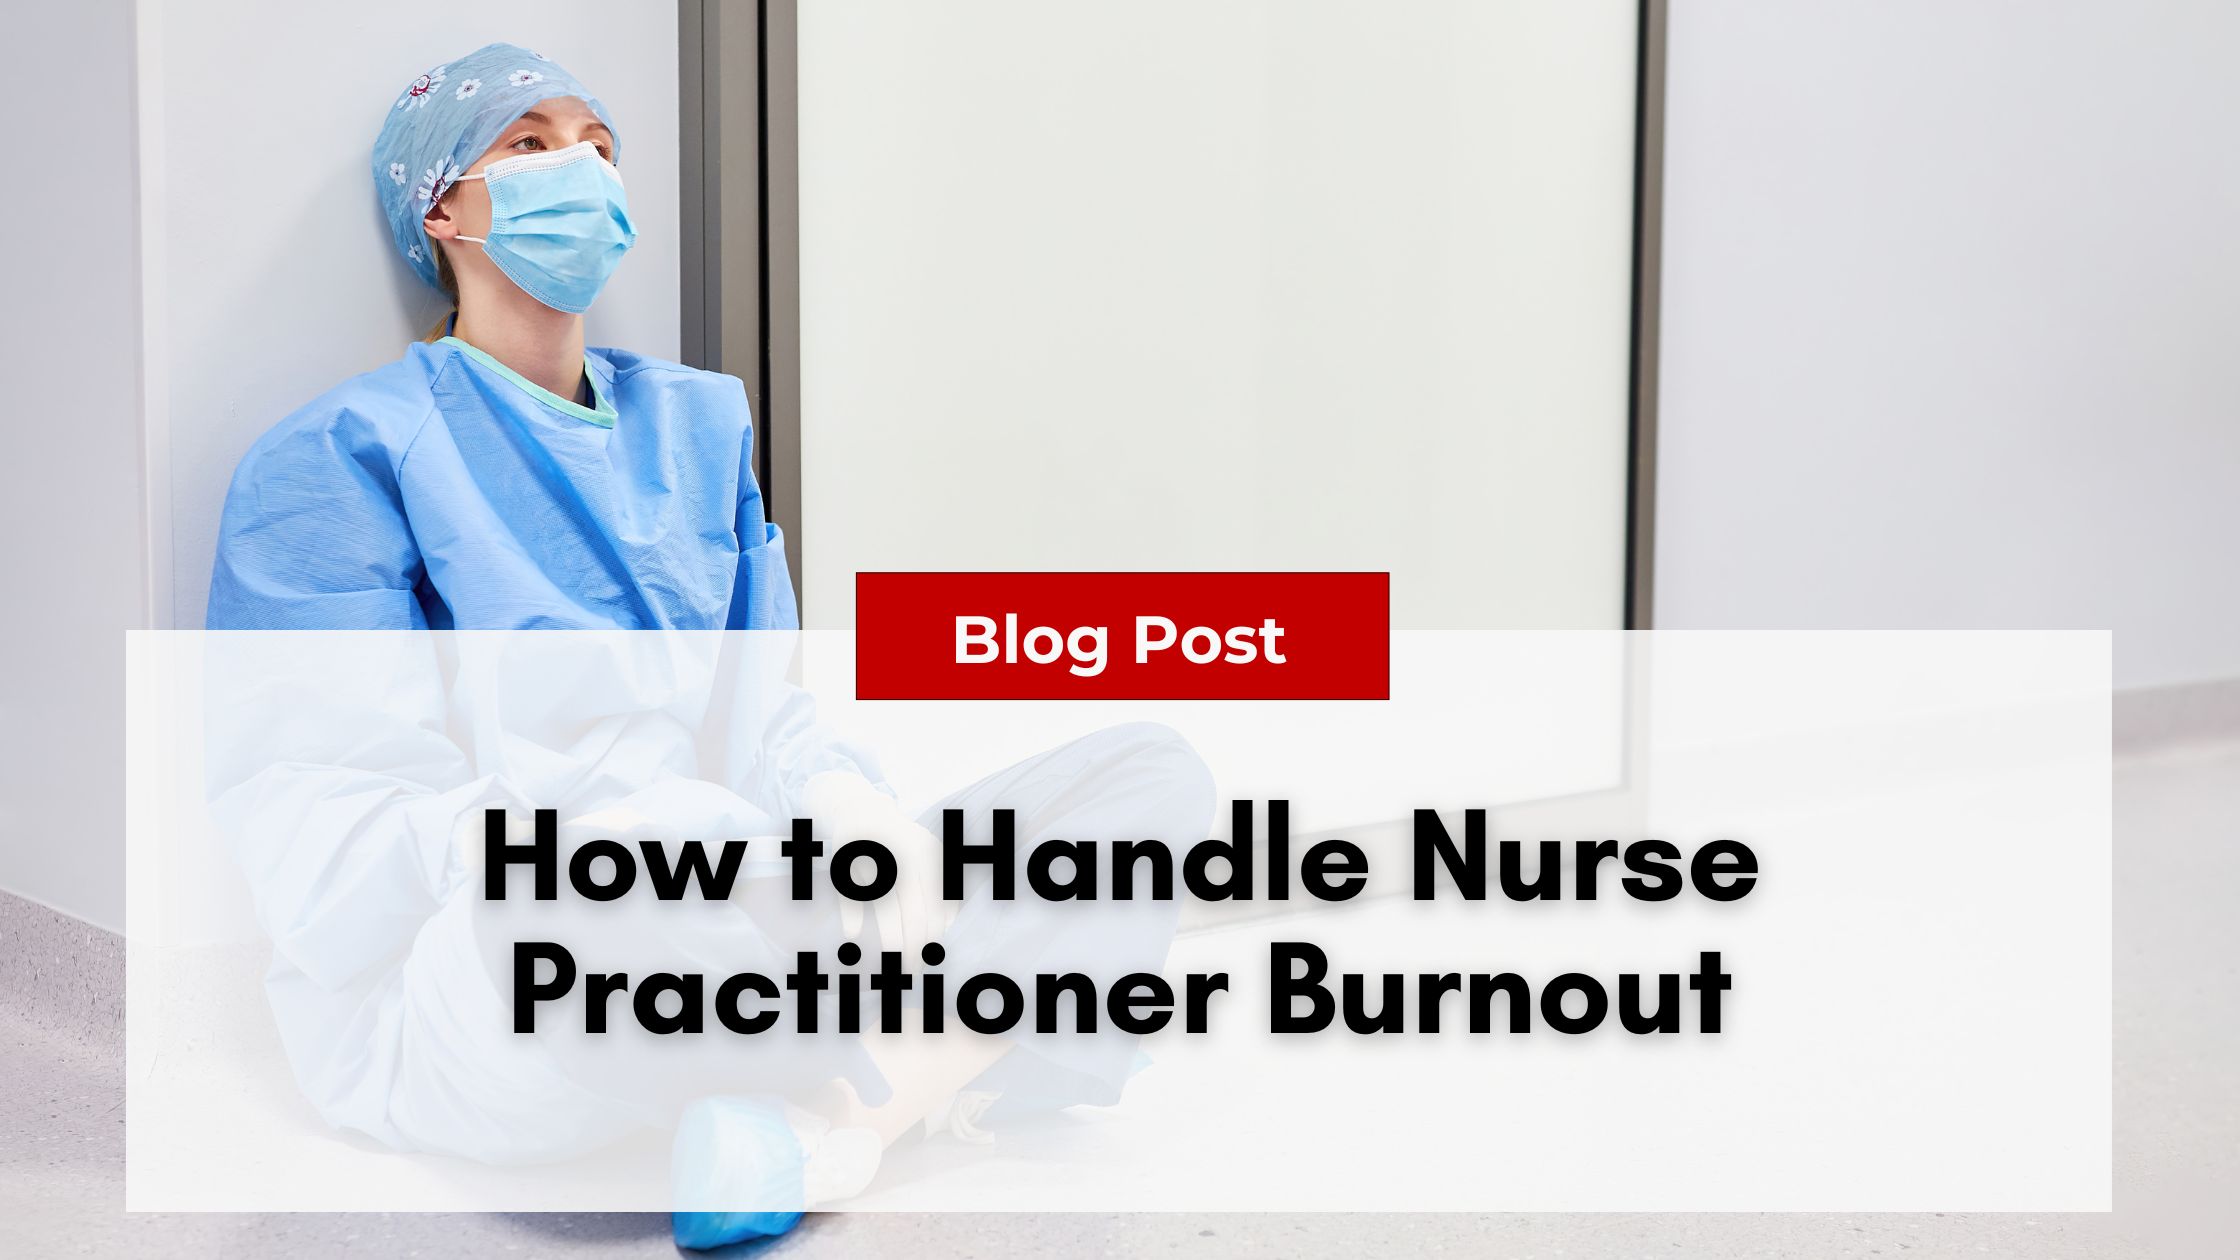 A nurse sits on the floor, wearing scrubs and a mask, with a text overlay that reads, "Blog Post: Navigating Nurse Practitioner Burnout.